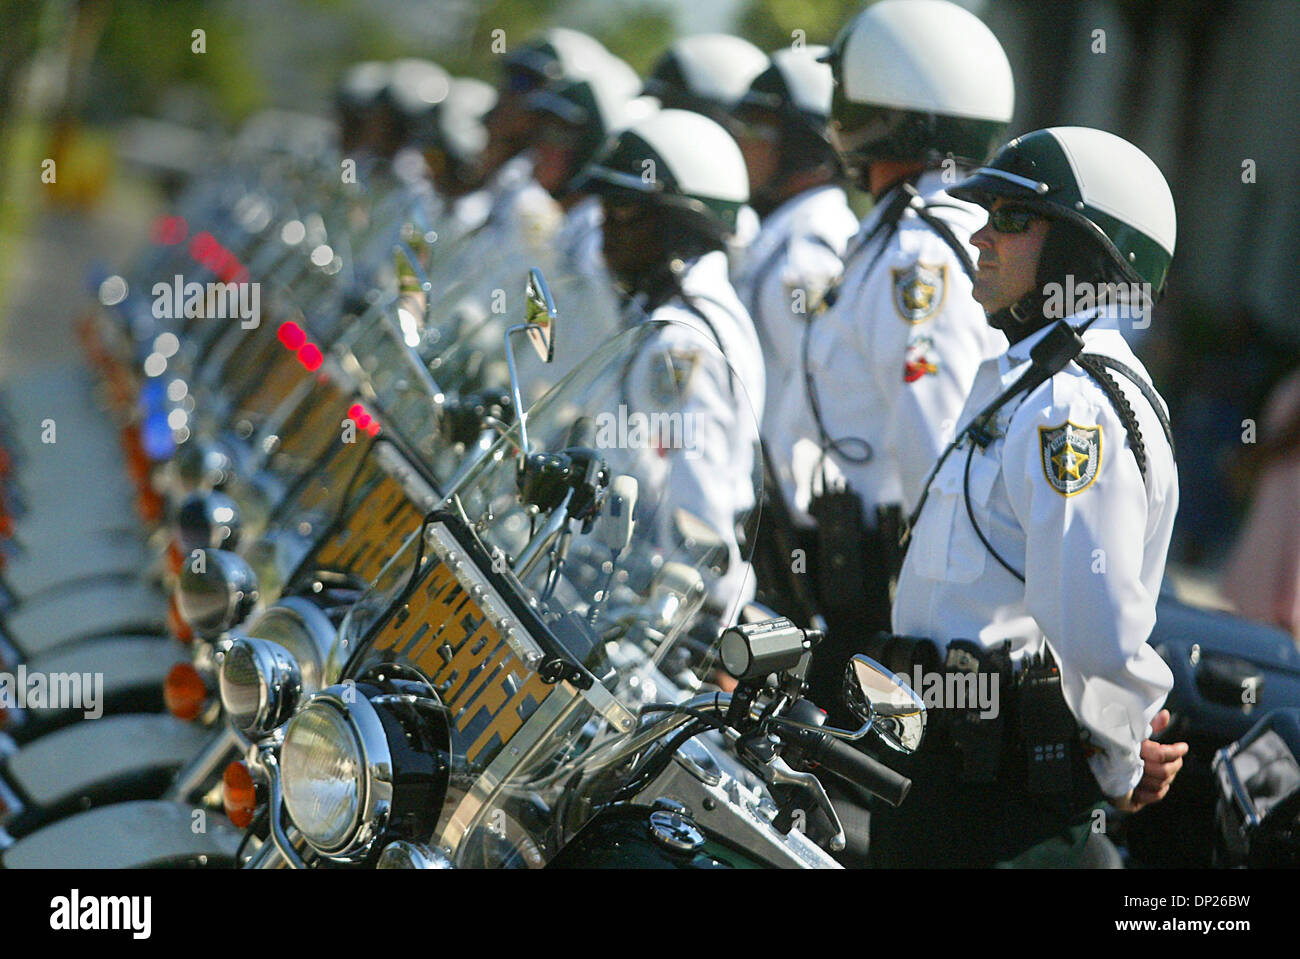 May 18, 2006; West Palm Beach, FL, USA; A row of sheriff's deputies on motorcycles particpate in Annual Fallen Deputy Memorial at the Sheriff's office headquarters in West Palm Beach Thursday morning.  Twelve sheriff's deputies were honored in total.  Mandatory Credit: Photo by Damon Higgins/Palm Beach Post/ZUMA Press. (©) Copyright 2006 by Palm Beach Post Stock Photo